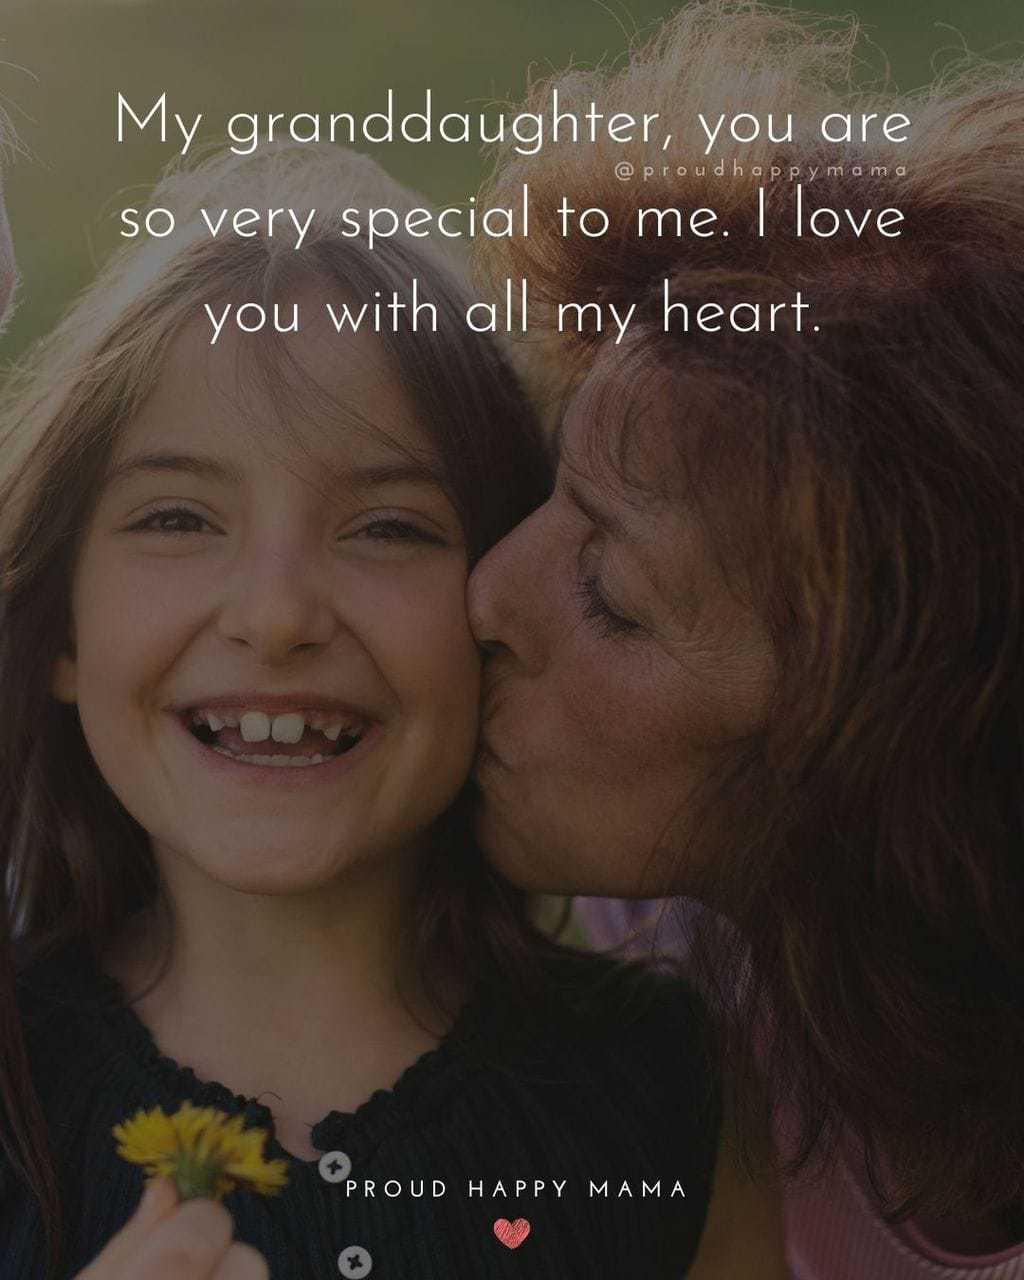 Granddaughter Quotes - My granddaughter, you are so very special to me. I love you with all my heart.’